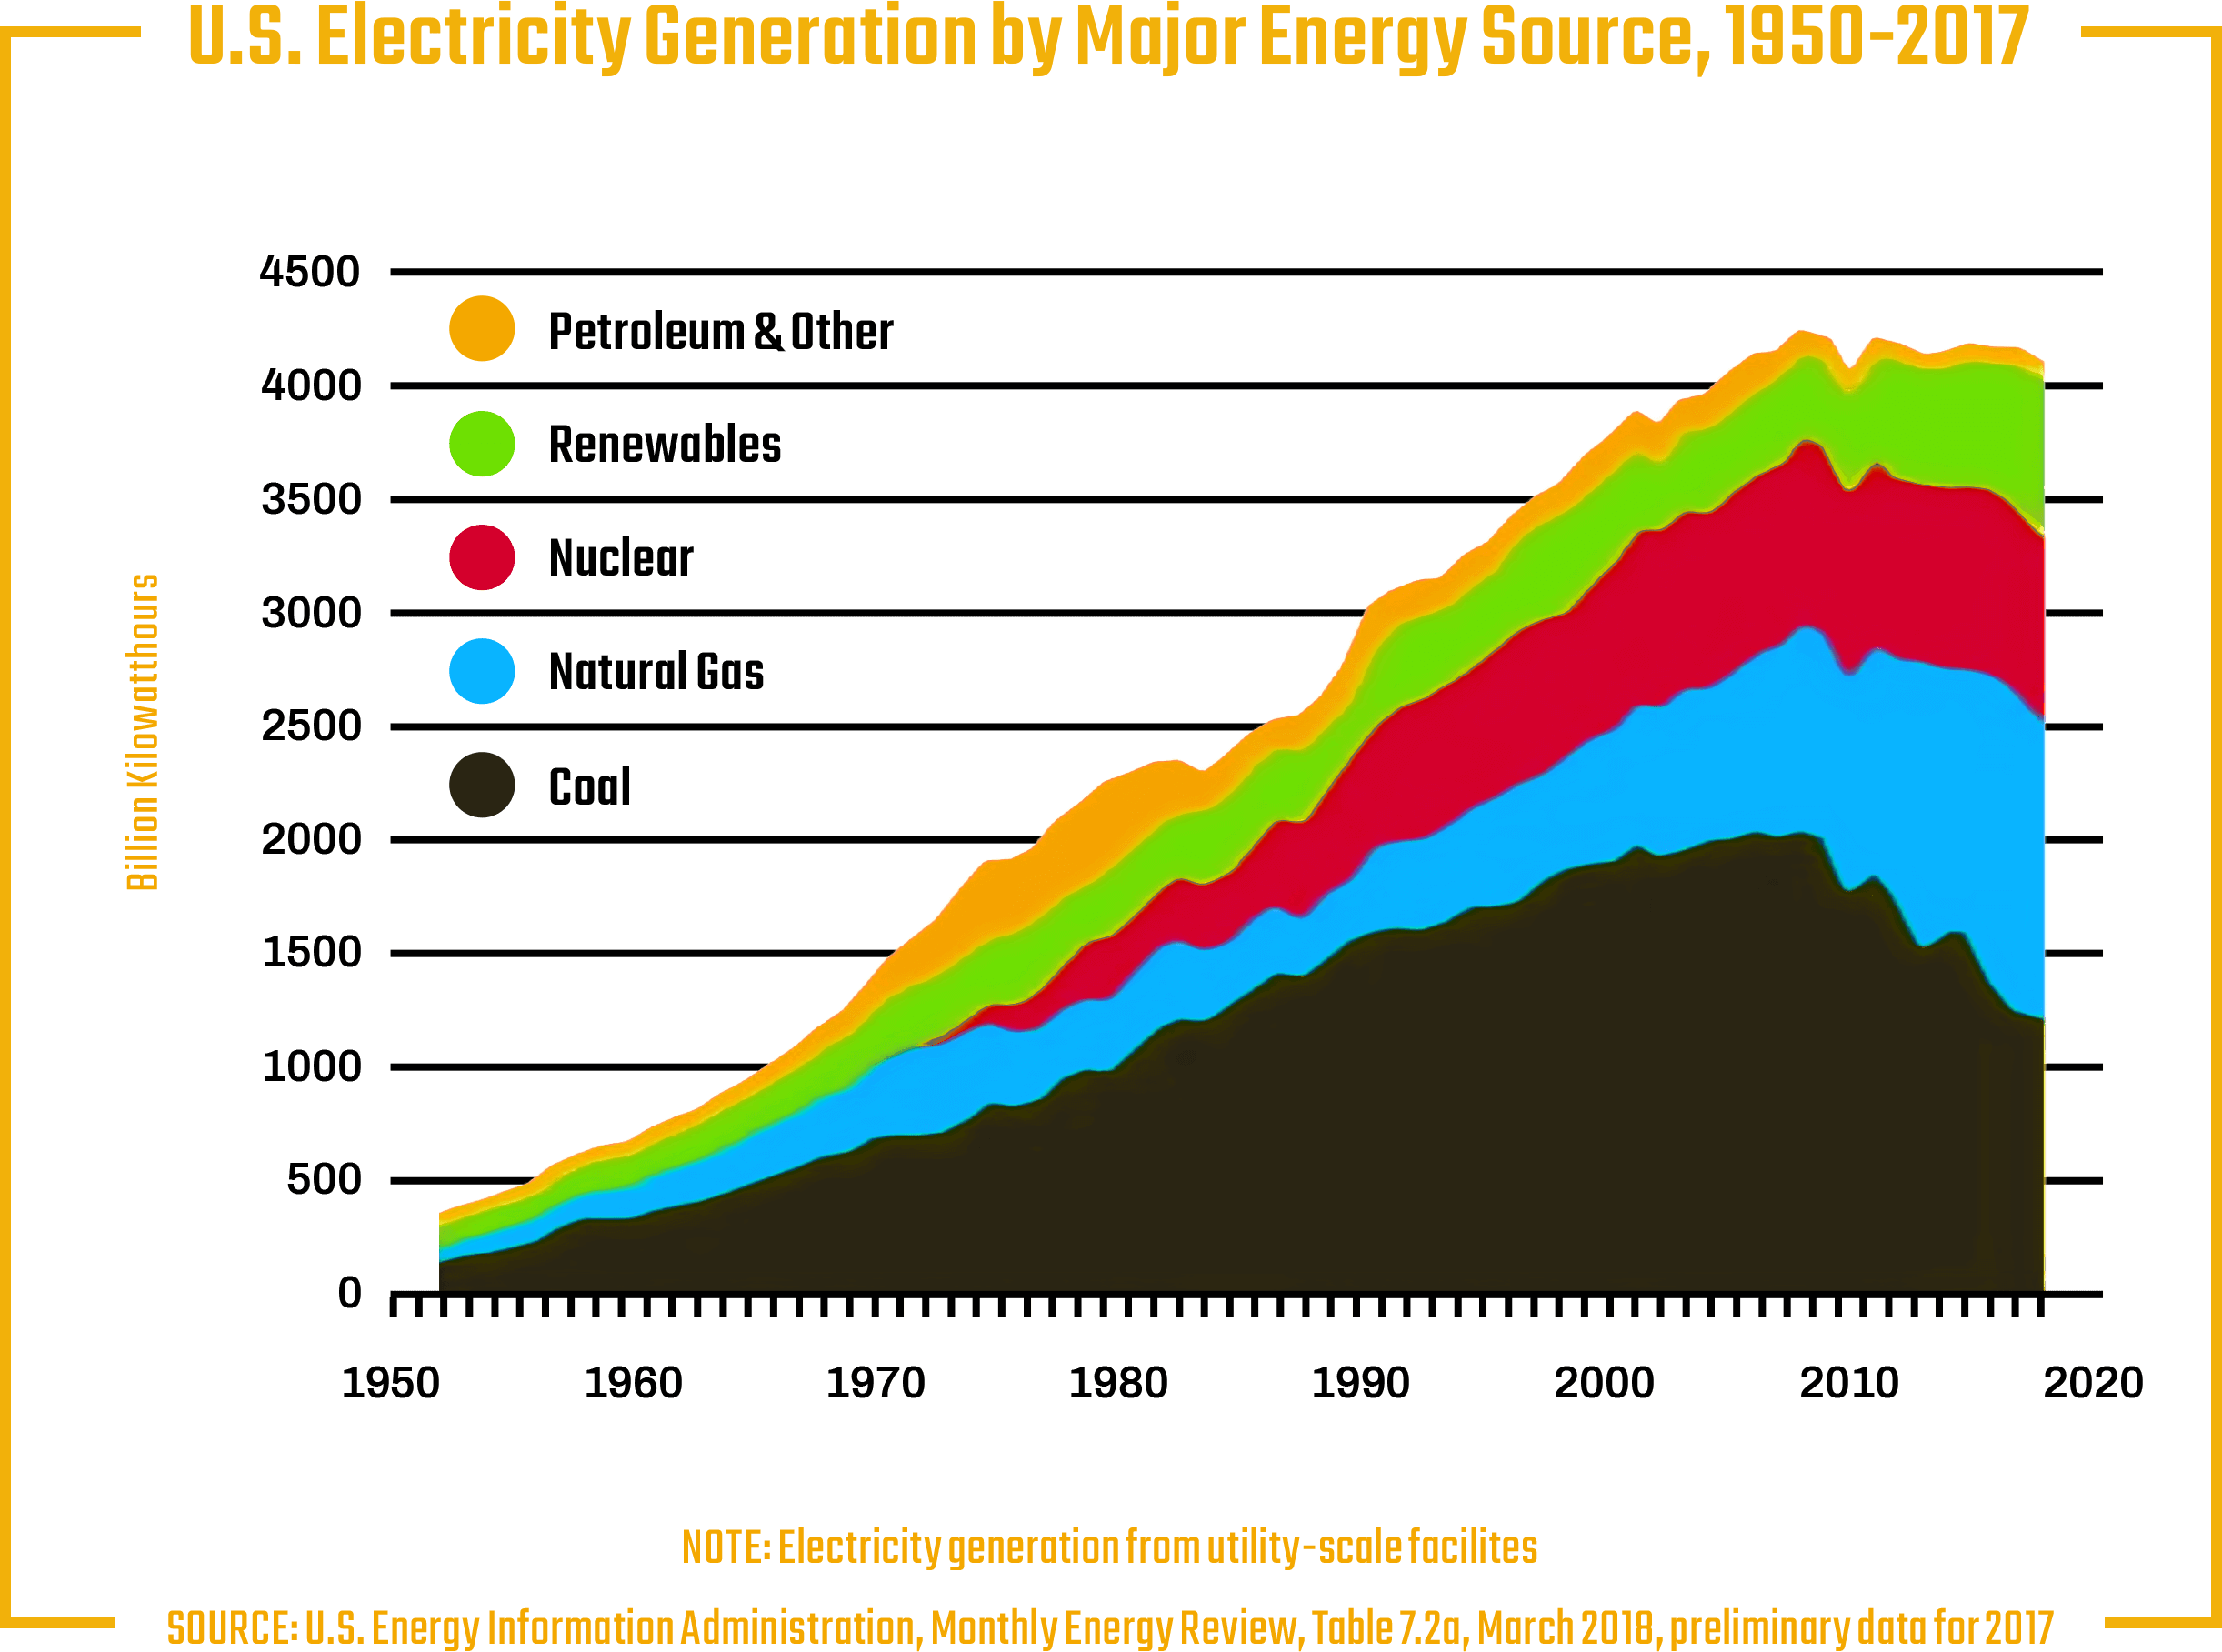 U.S. Electric Generation by Major Energy Source, 1950-2017